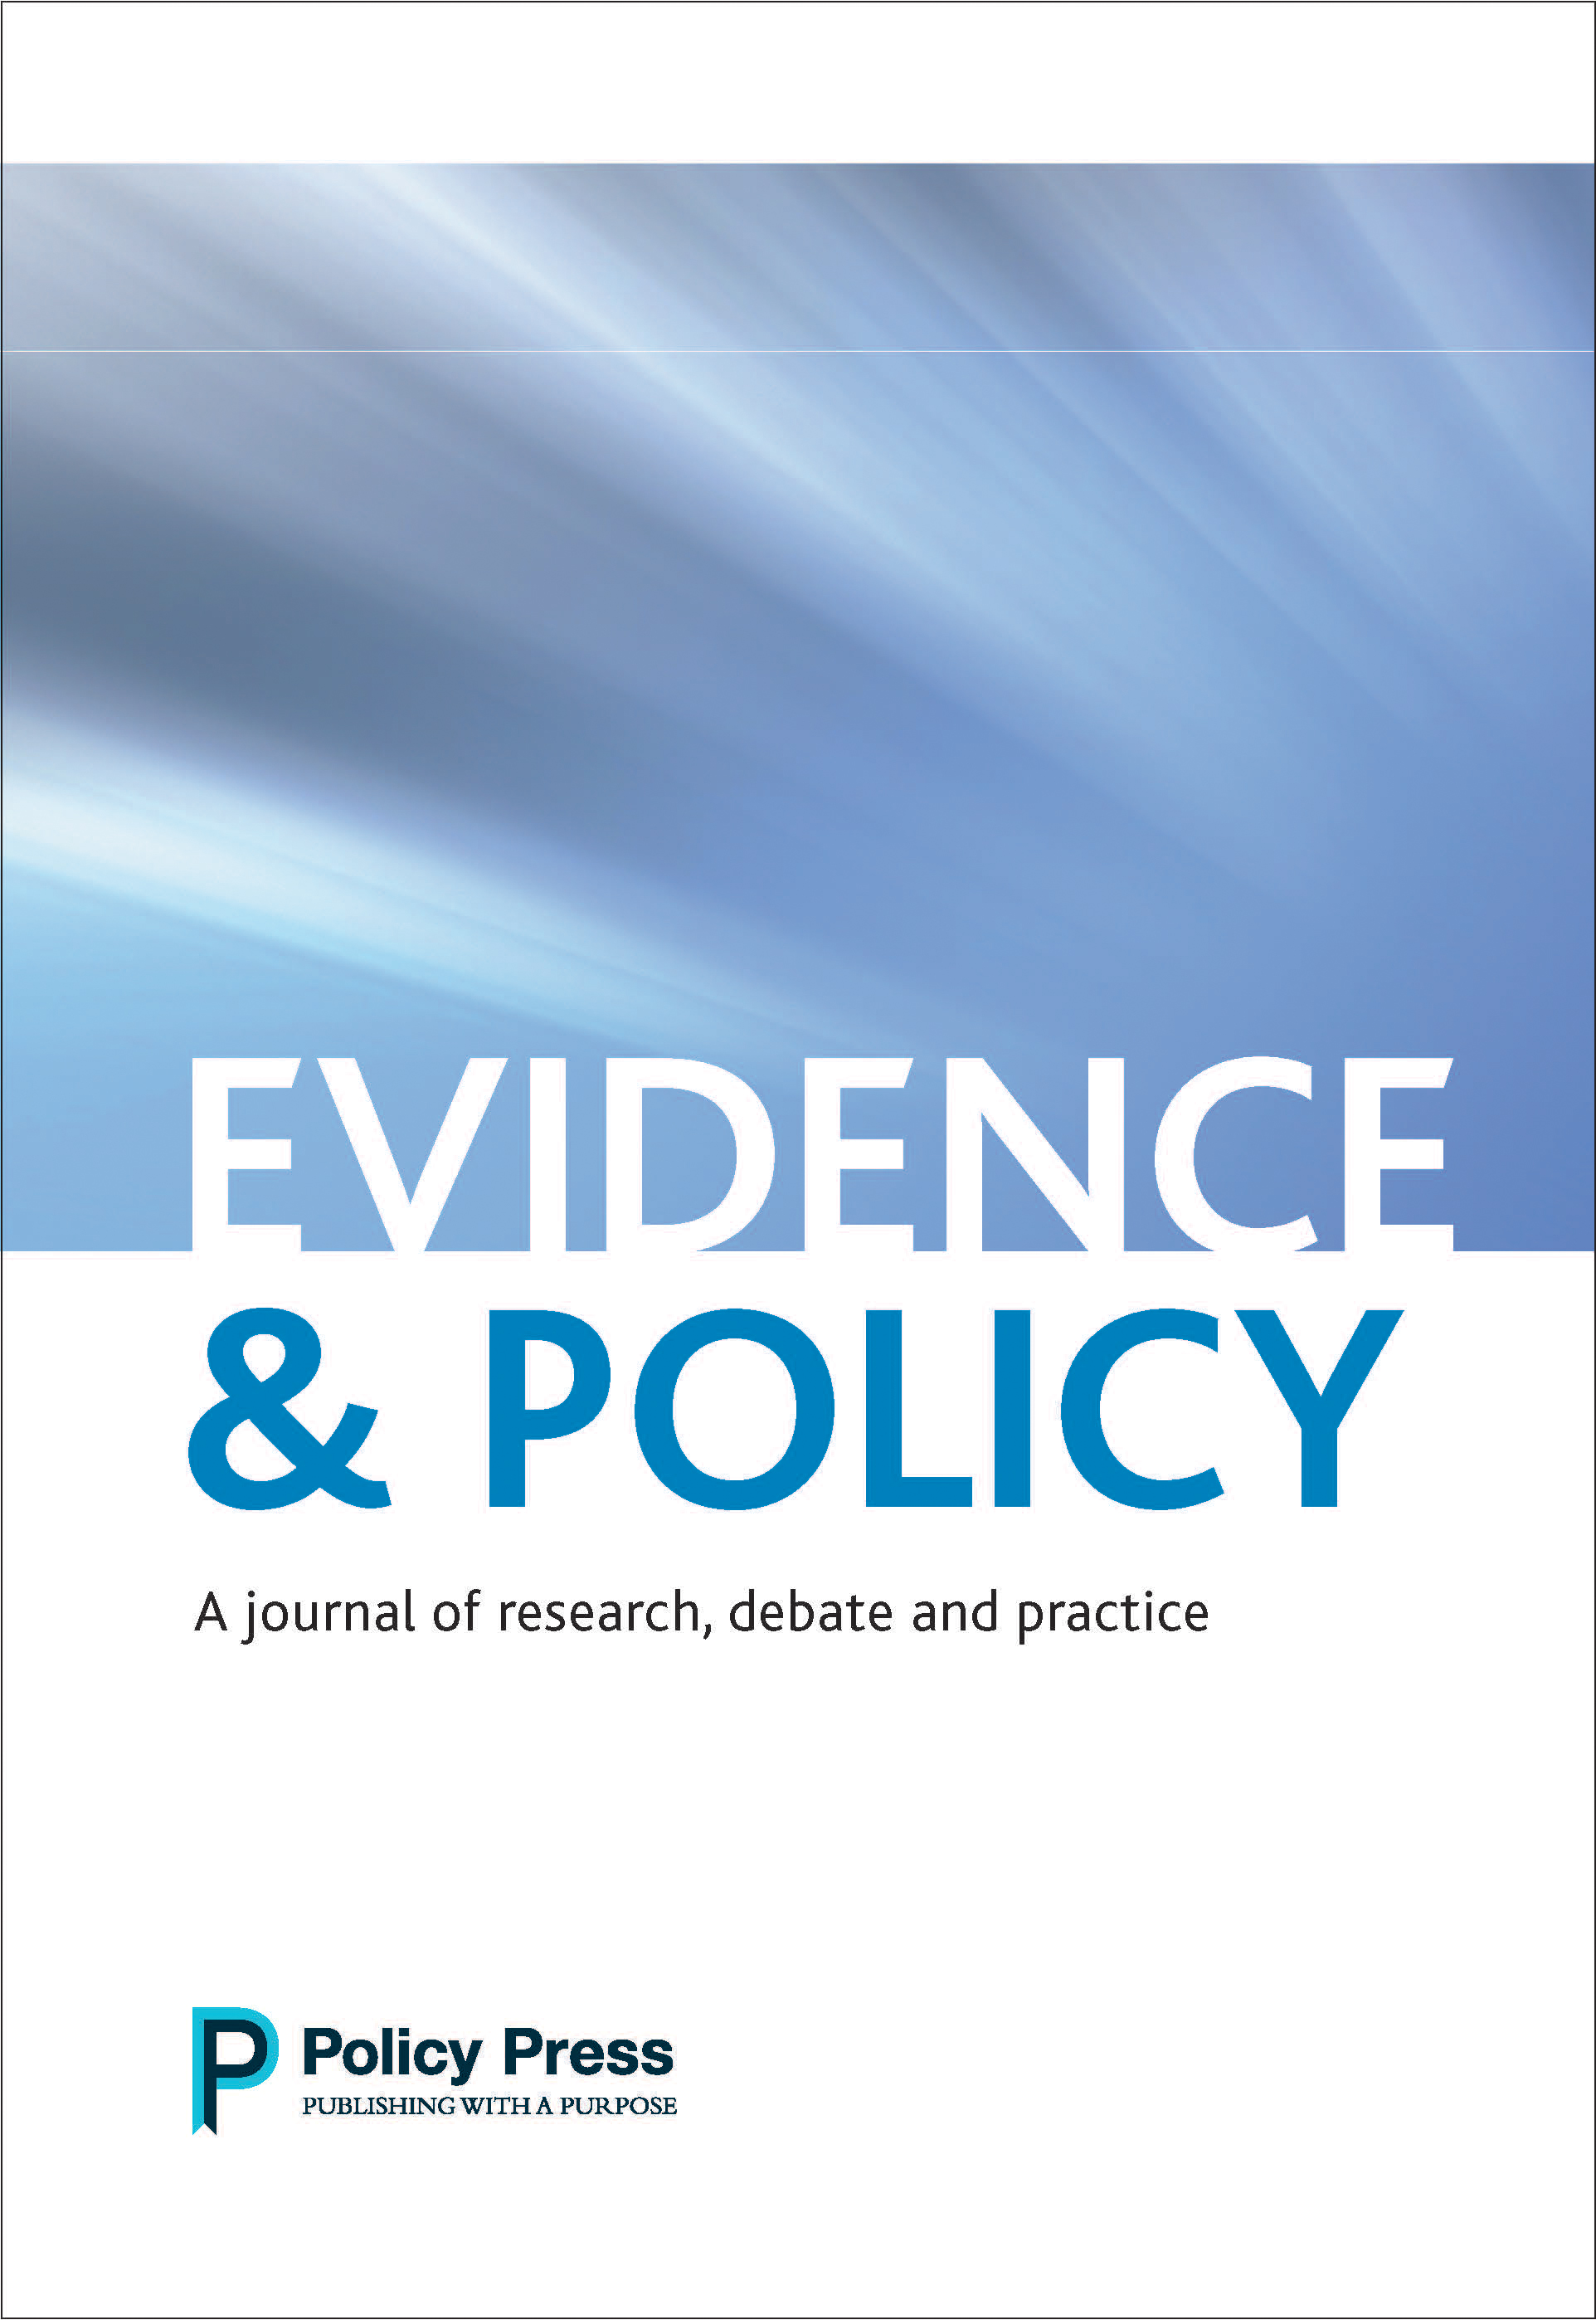 Introducing the new Associate Editors of Evidence & Policy